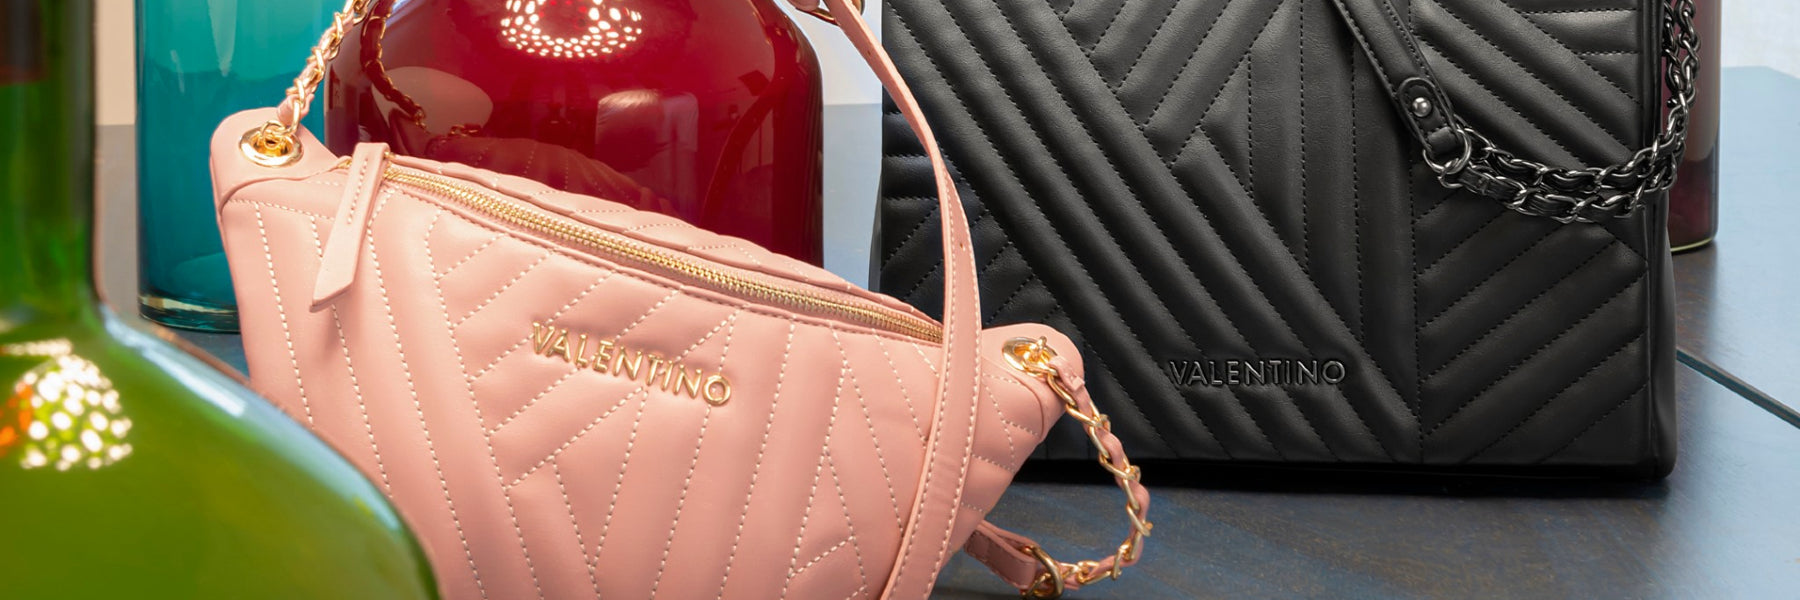 Valentino Bags and Accessories by Mario Valentino | Beautiful Clutch bags | Crossbody Bags | Handbags | Shopping bags | Shoulder Bags | Backpack | Rucksacks | Wallets | Purses | Card Holder